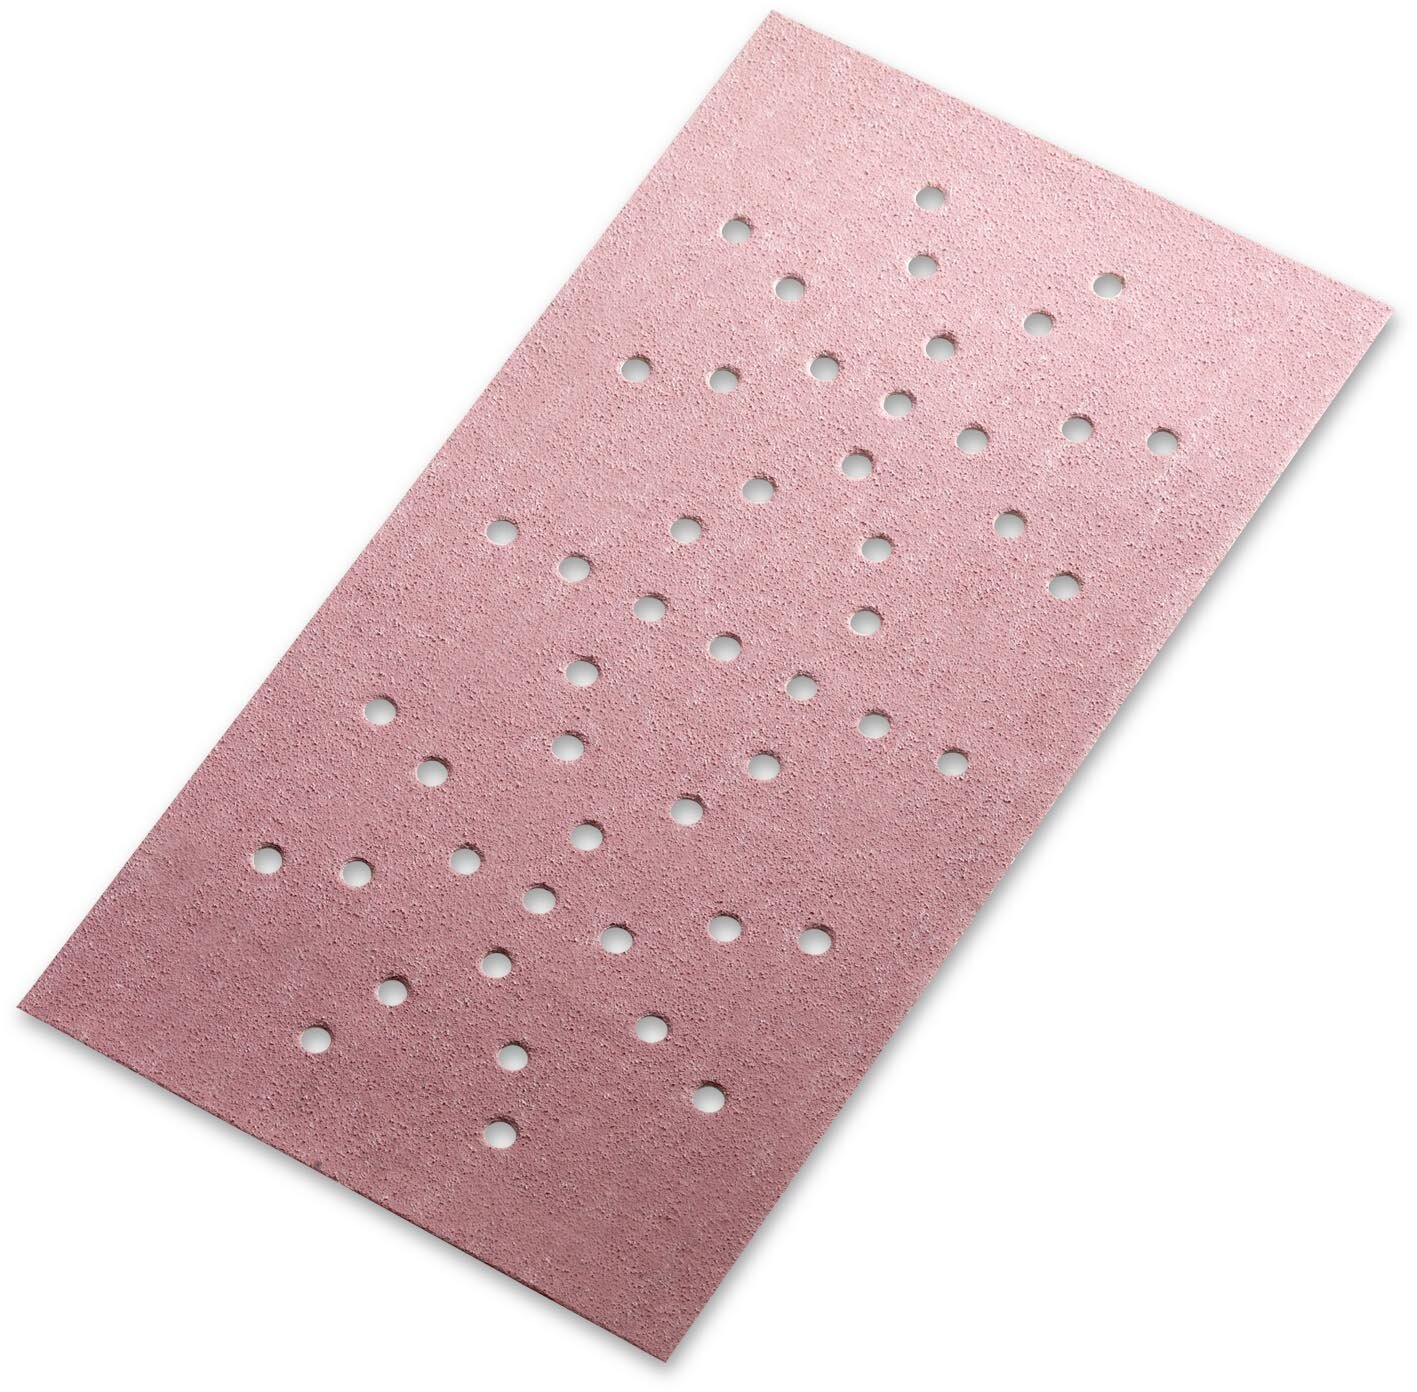 siaspeed sandpaper 115x230mm 49 hole grit 240 (100 pieces)